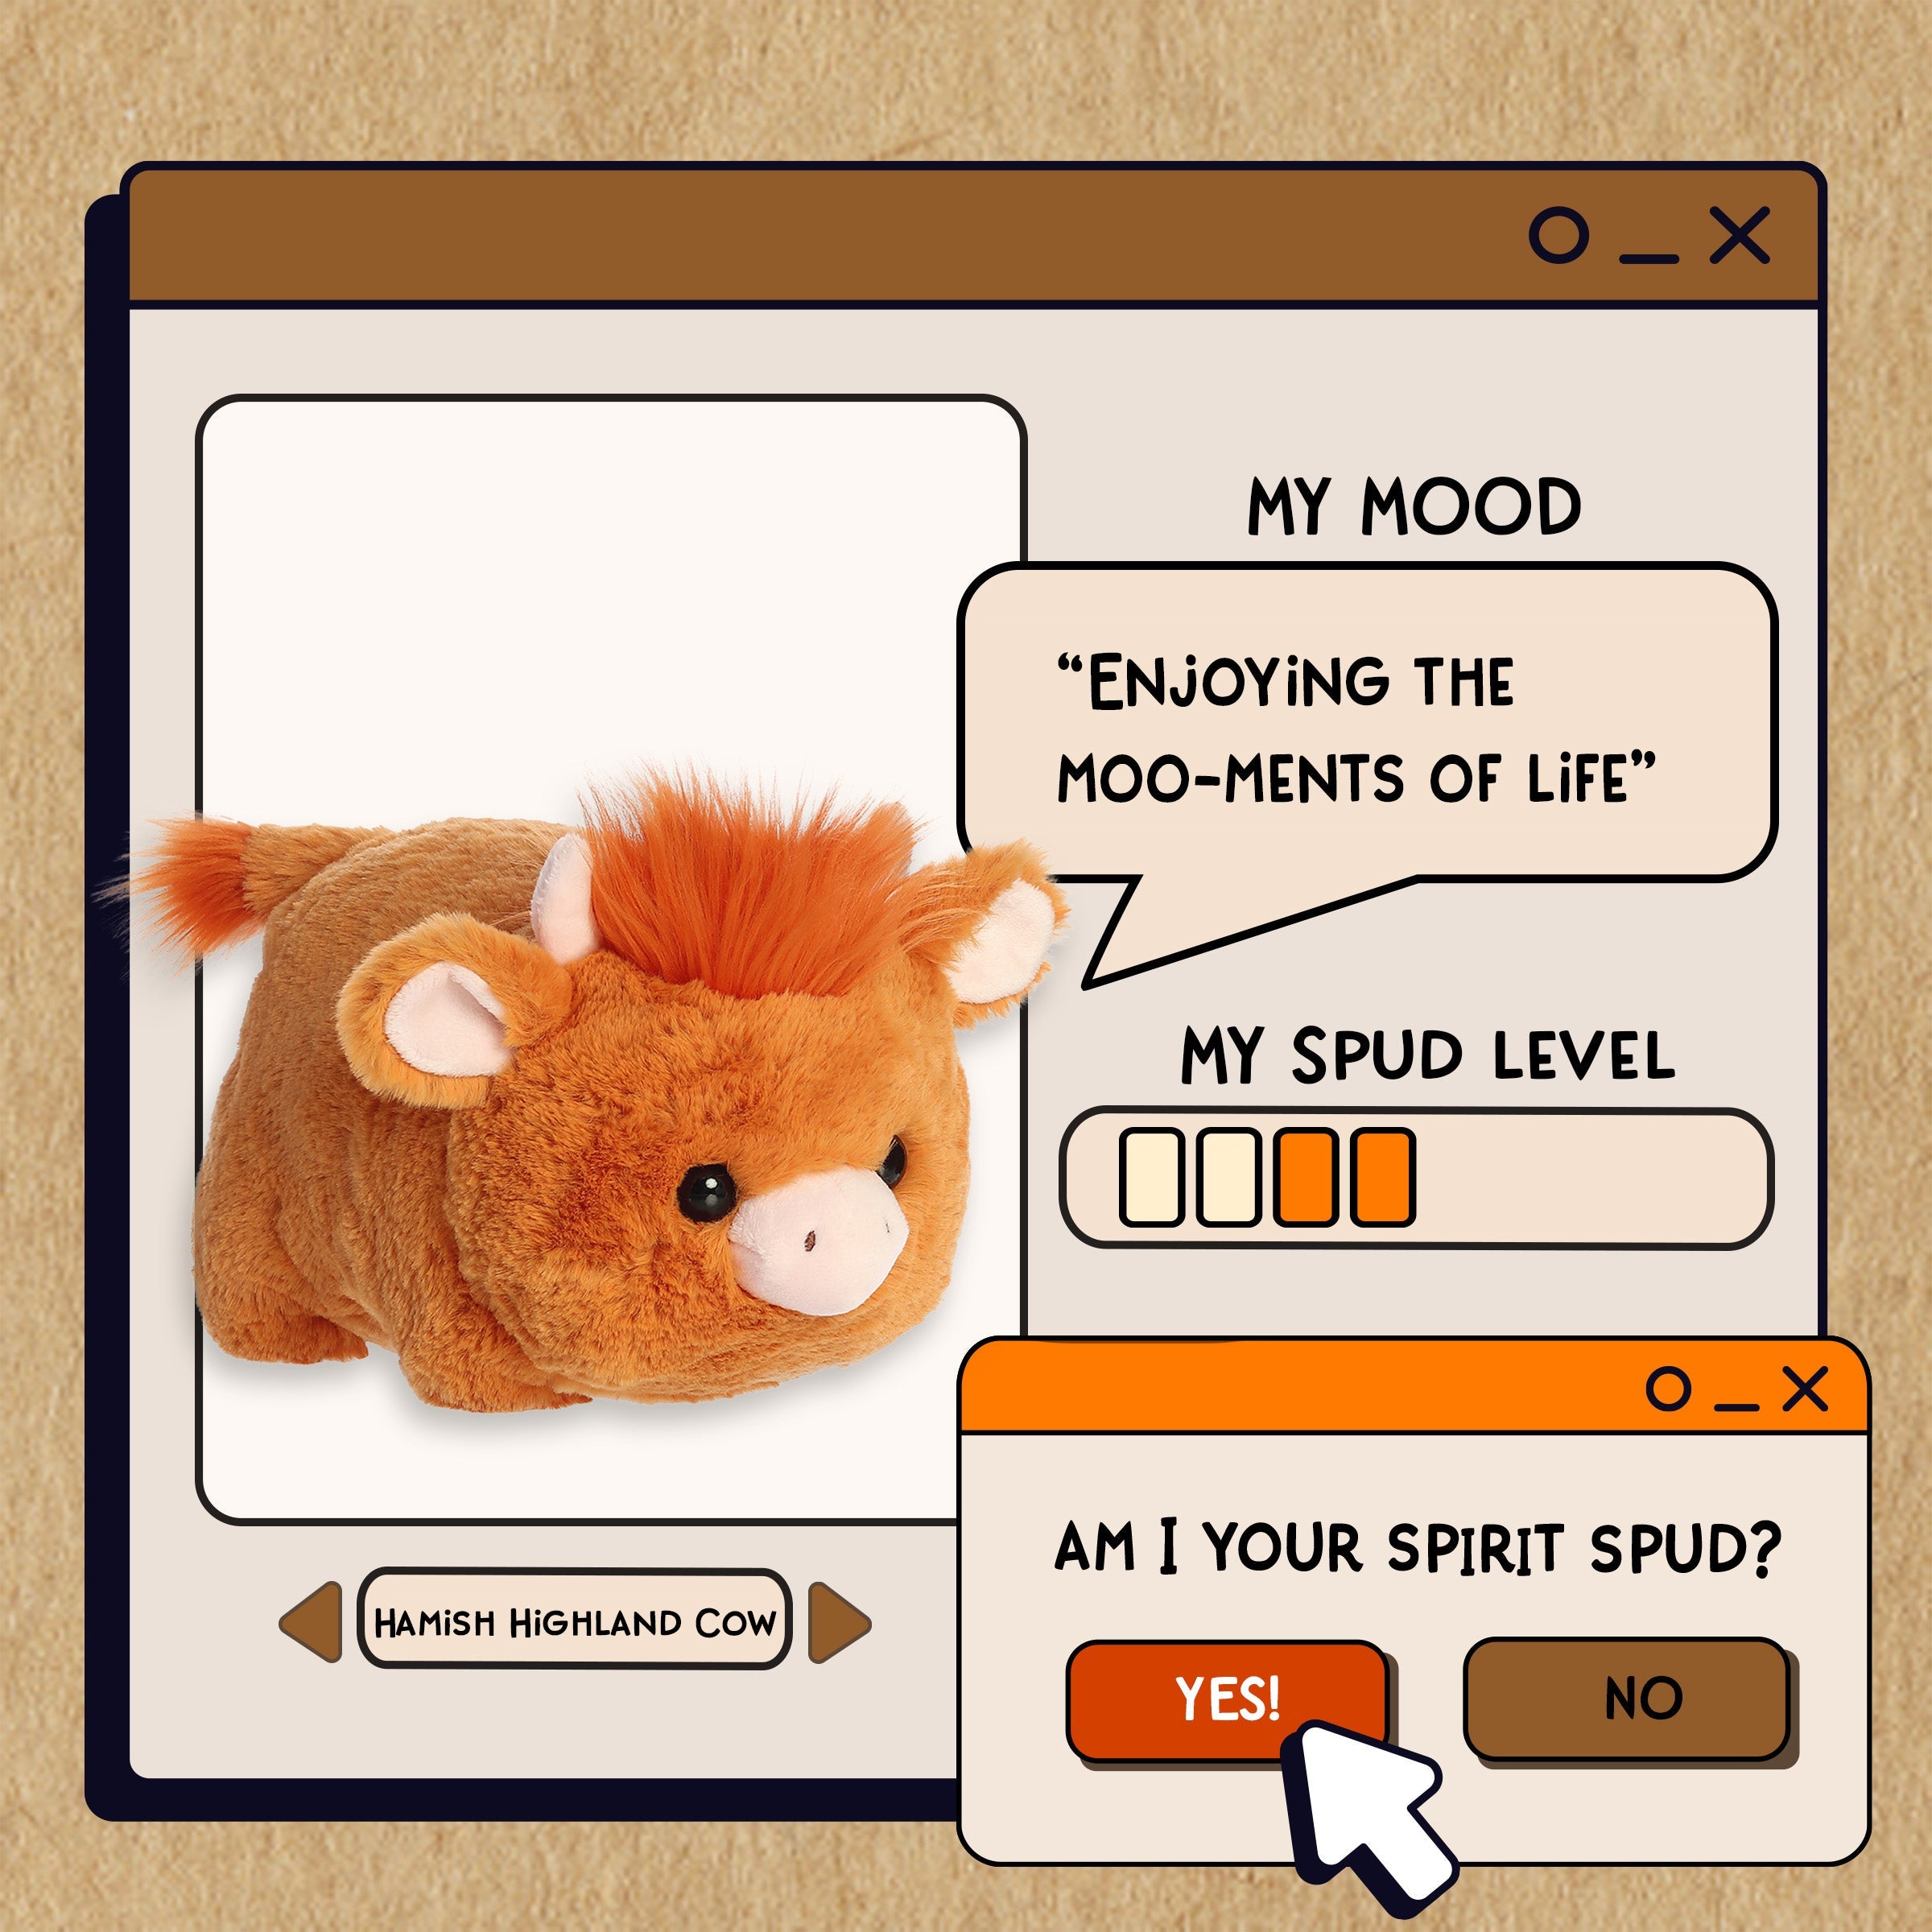 A spudsters product card for the Hamish Highland Cow plush by Aurora